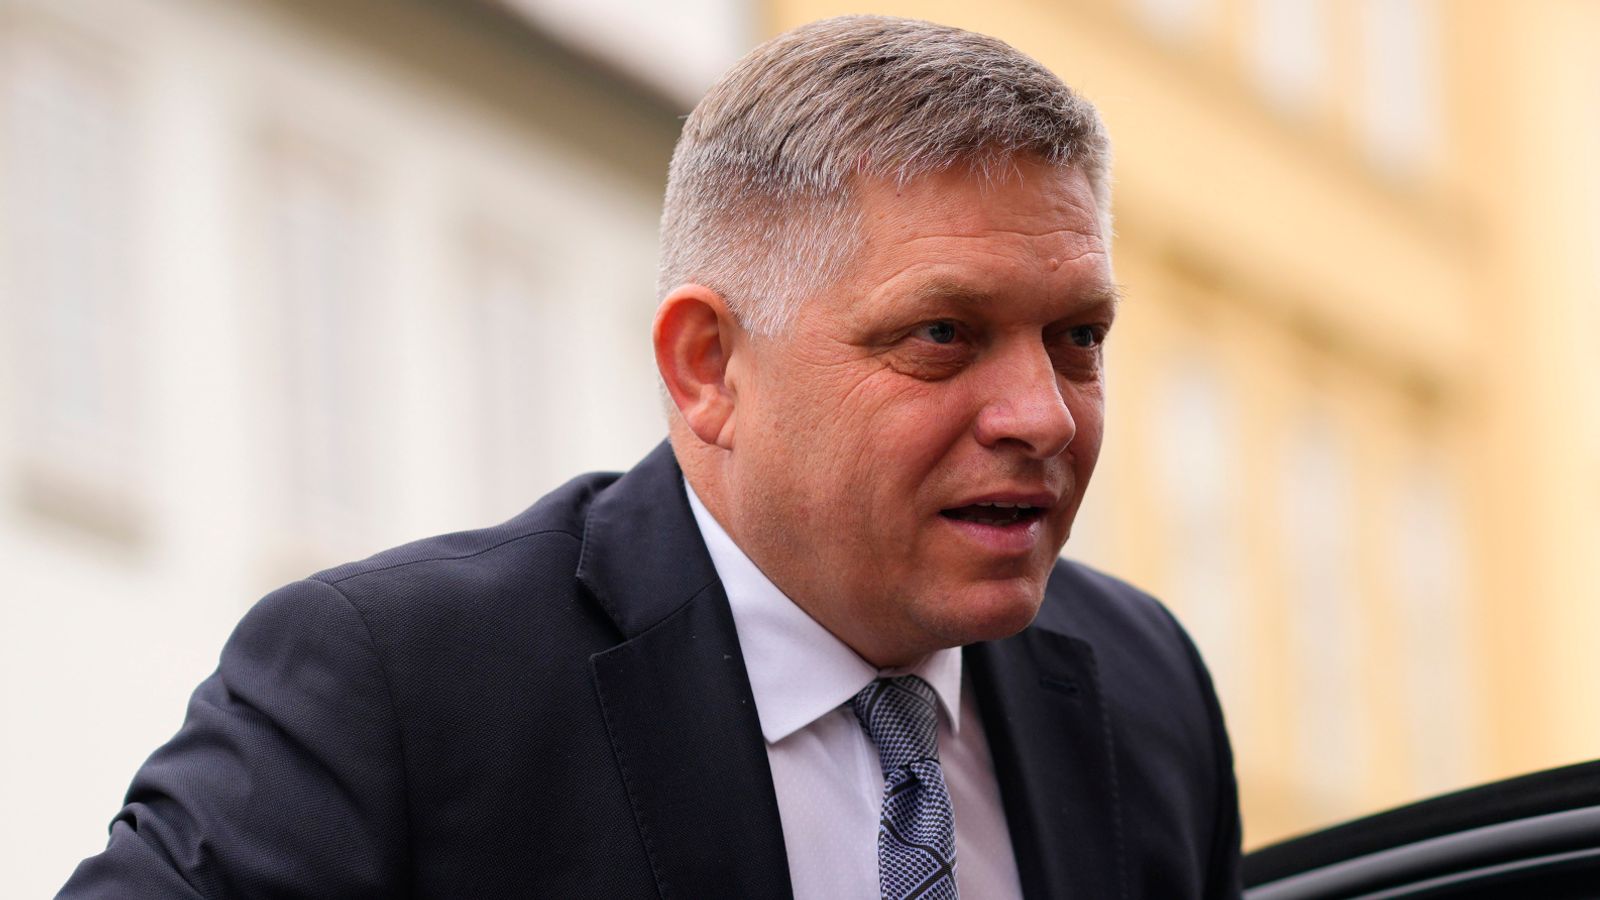 Shooter in assassination attempt on Slovak PM may not have been 'lone wolf', minister says